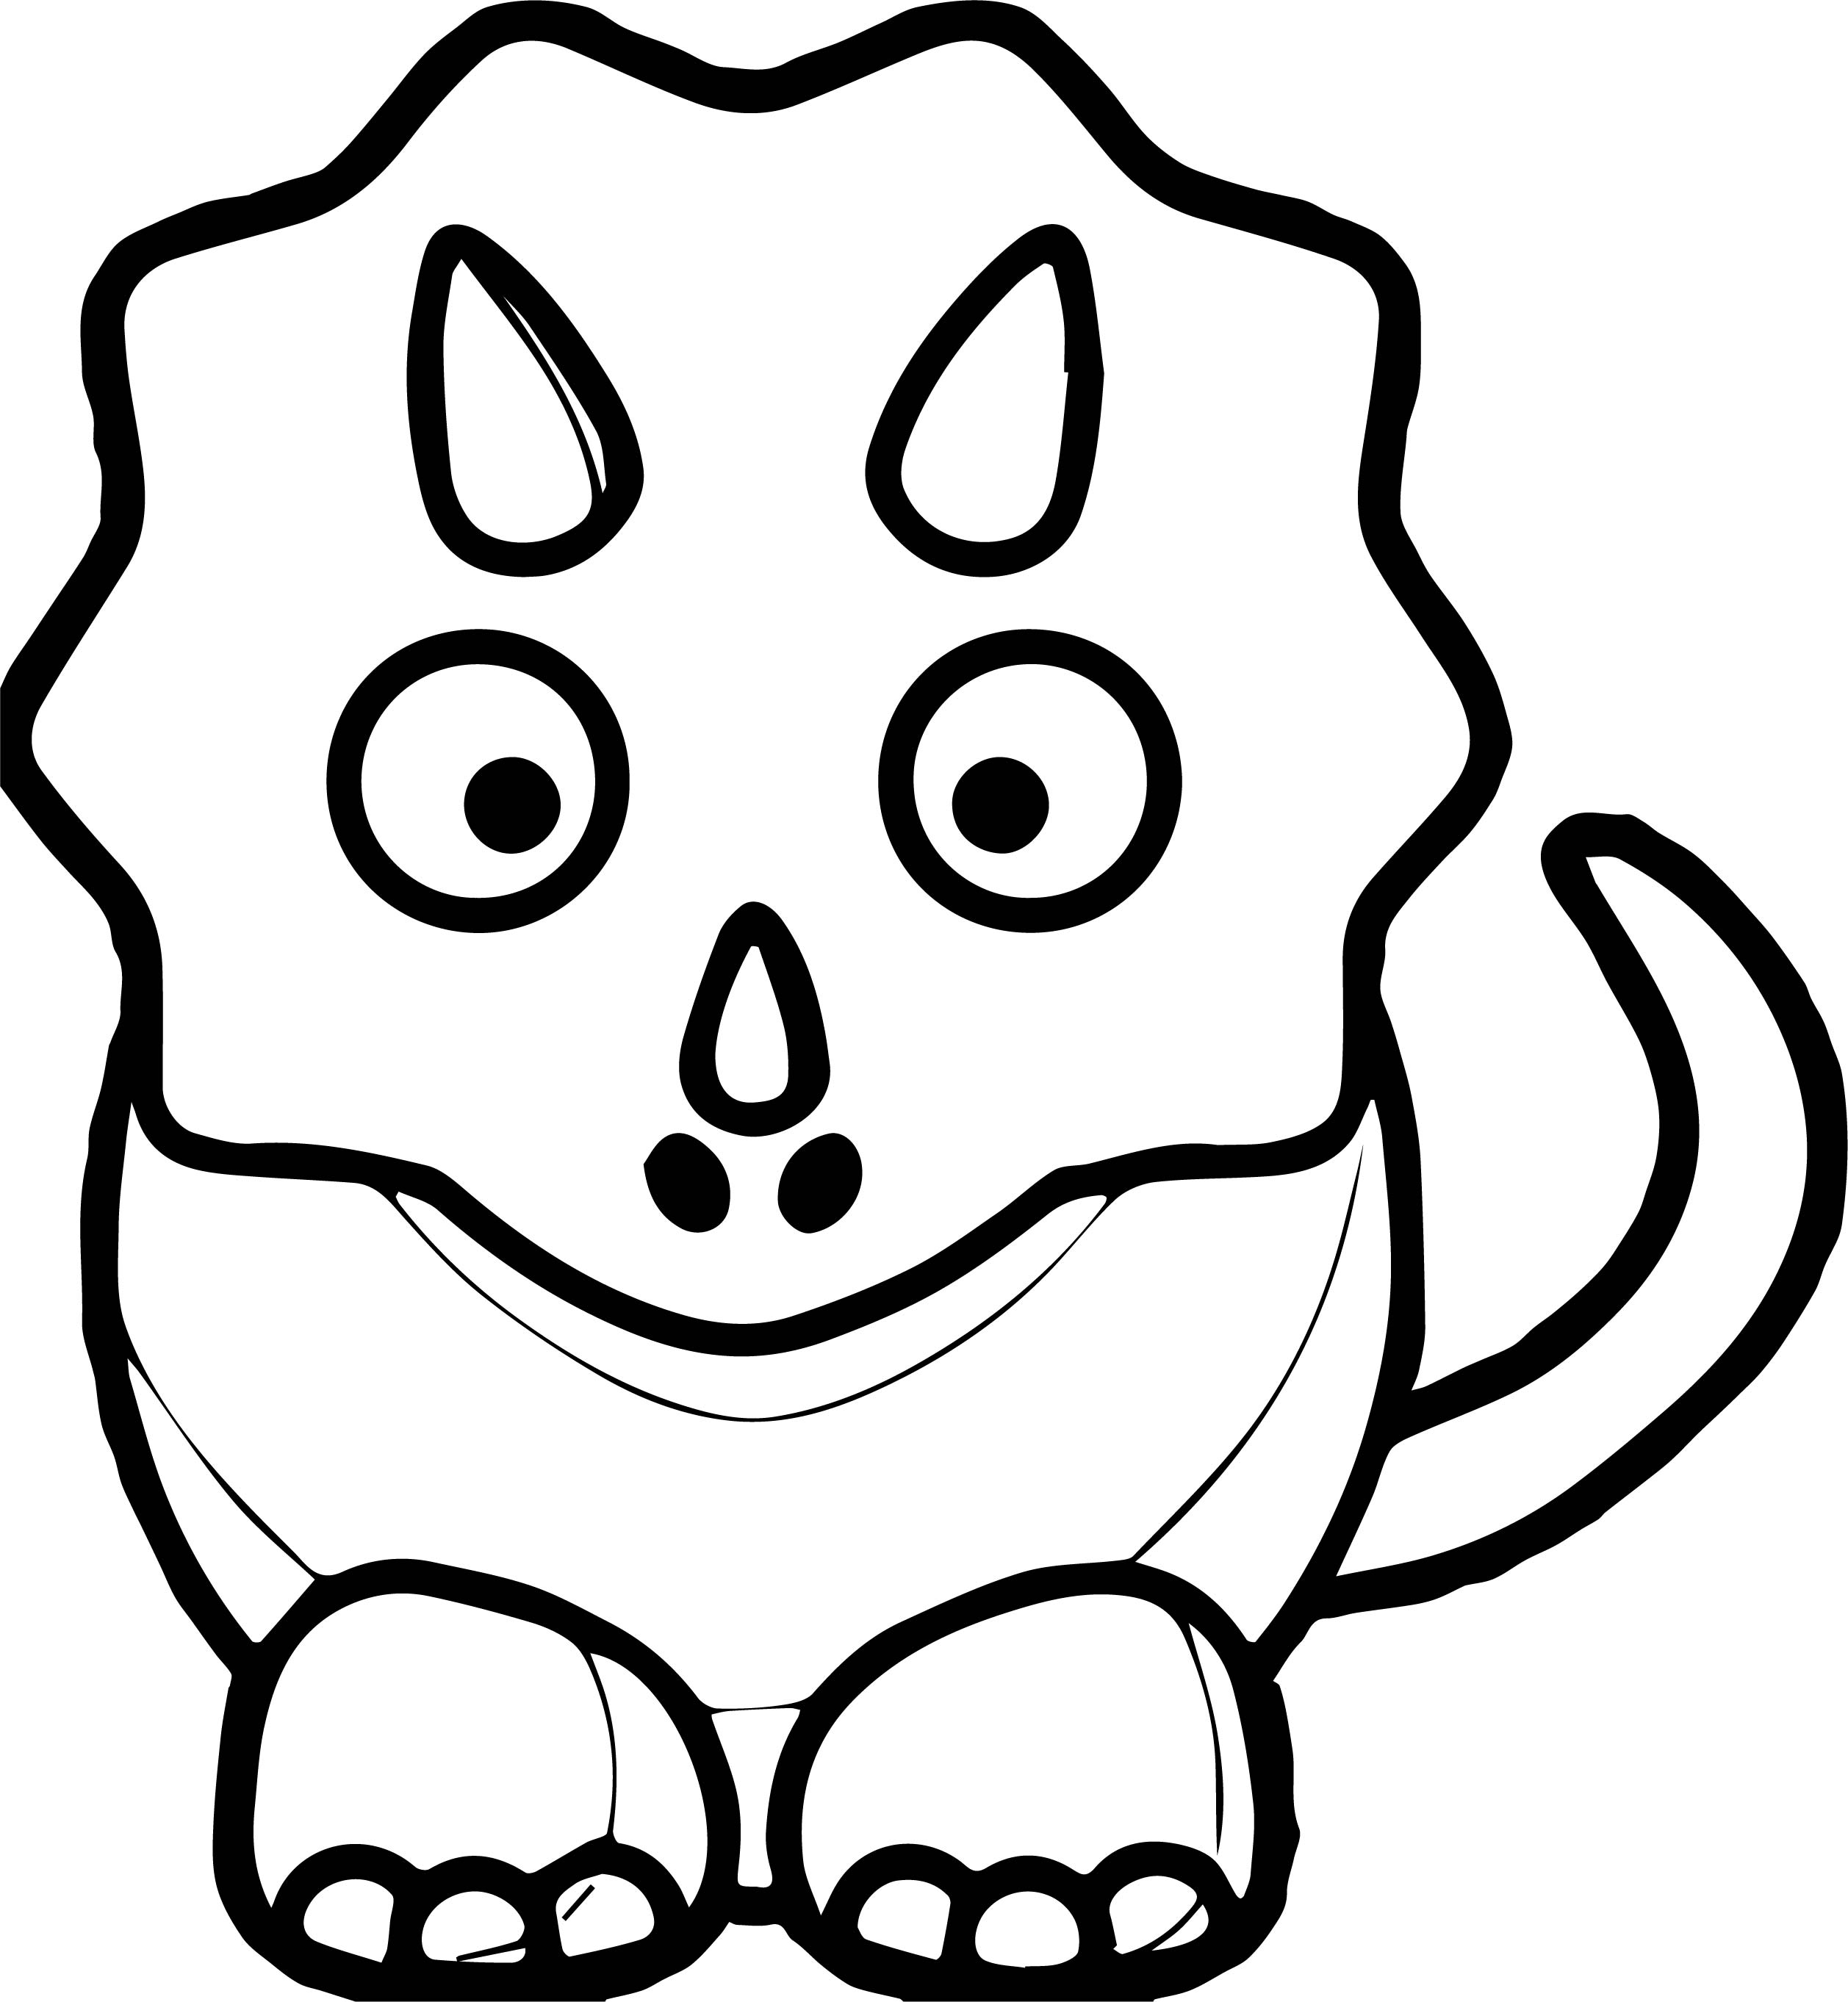 baby-dinosaur-coloring-page-free-download-on-clipartmag